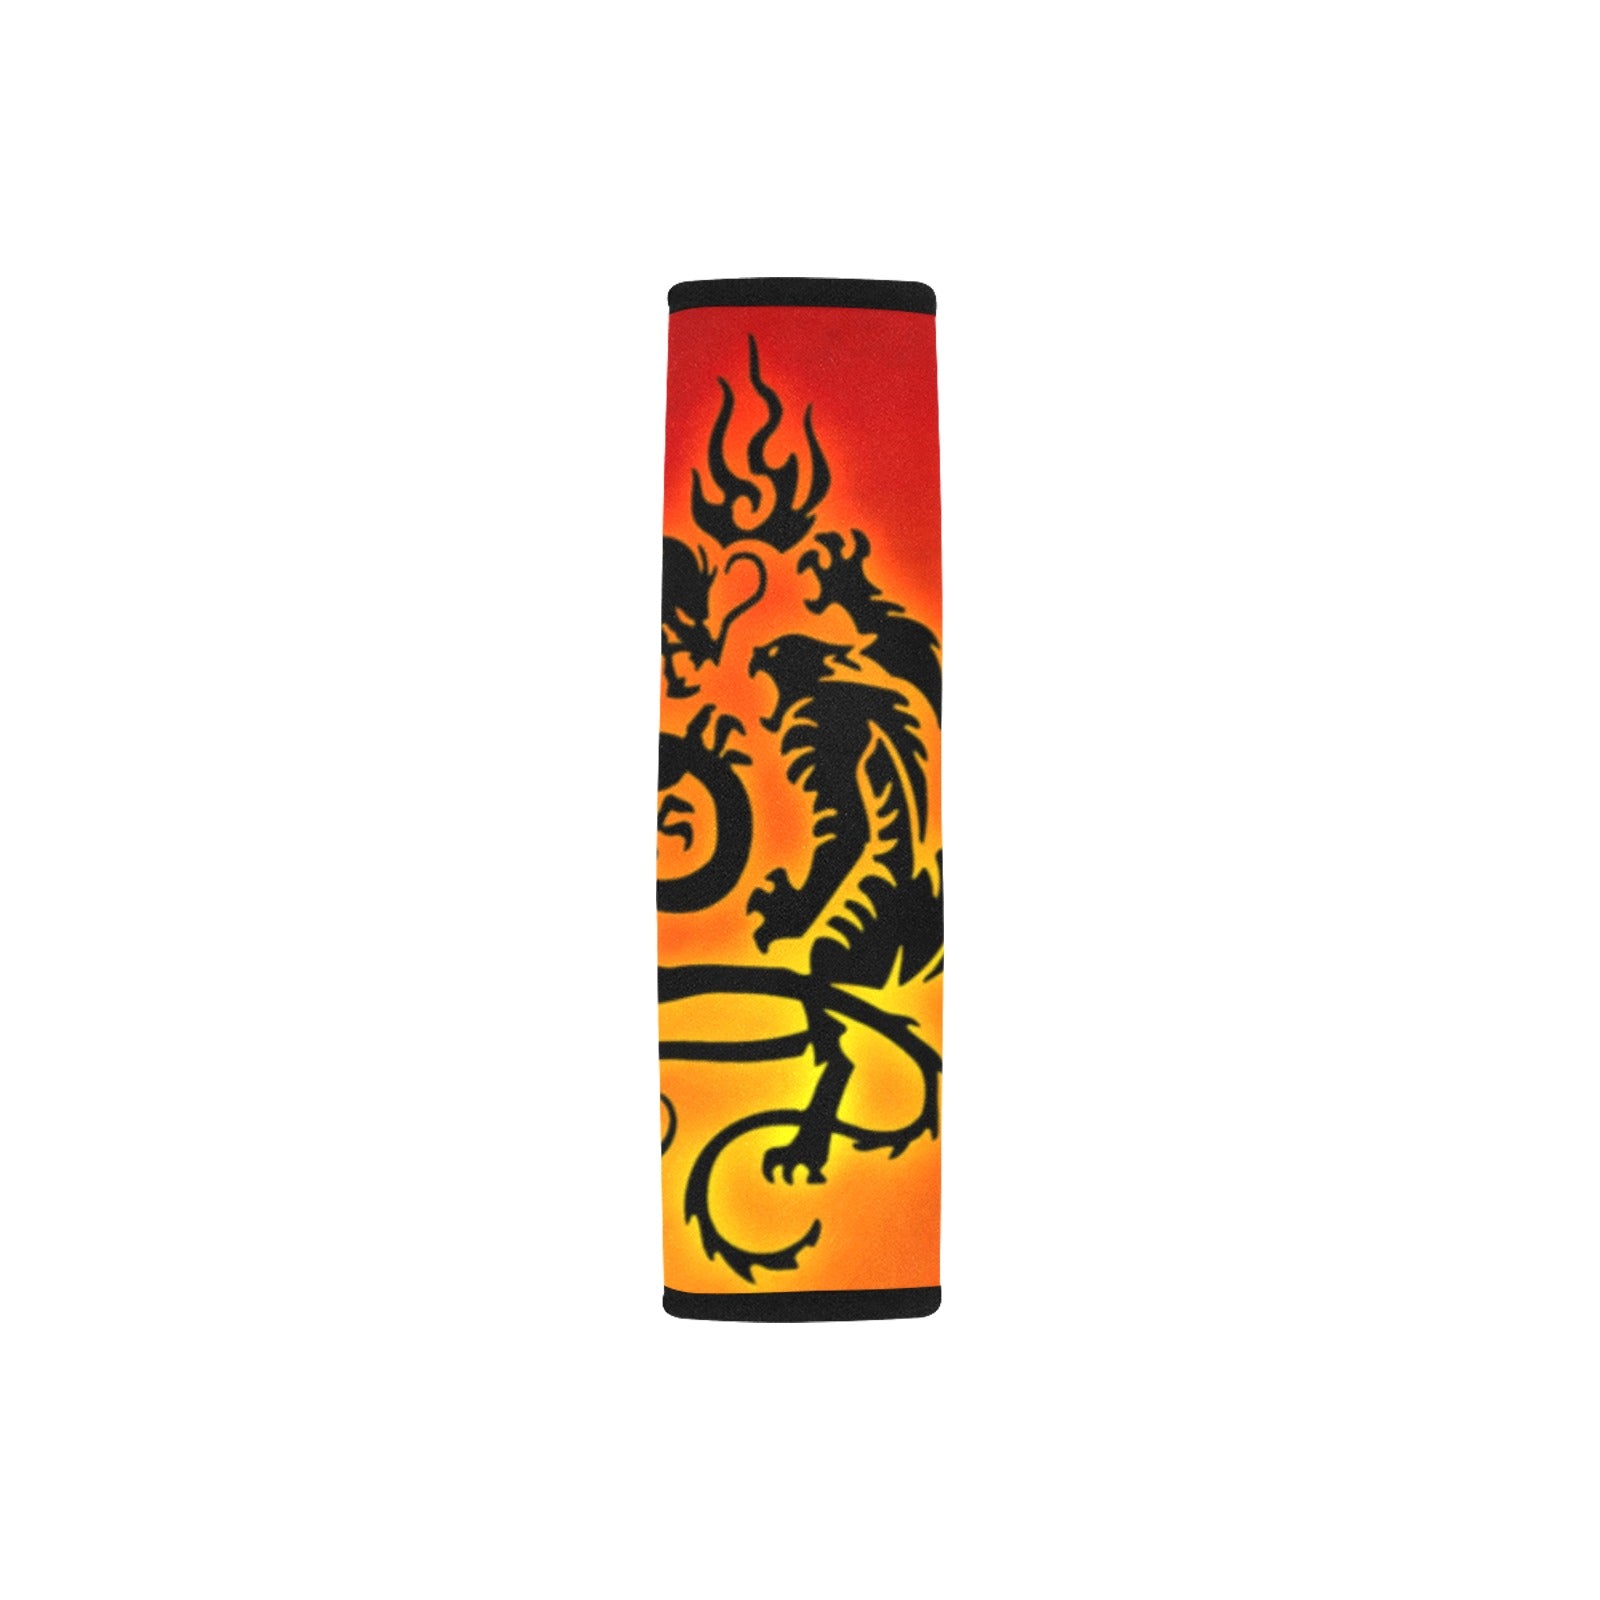 Tribal Tiger and Dragon Seat Belt Cover 7" x 8.5"